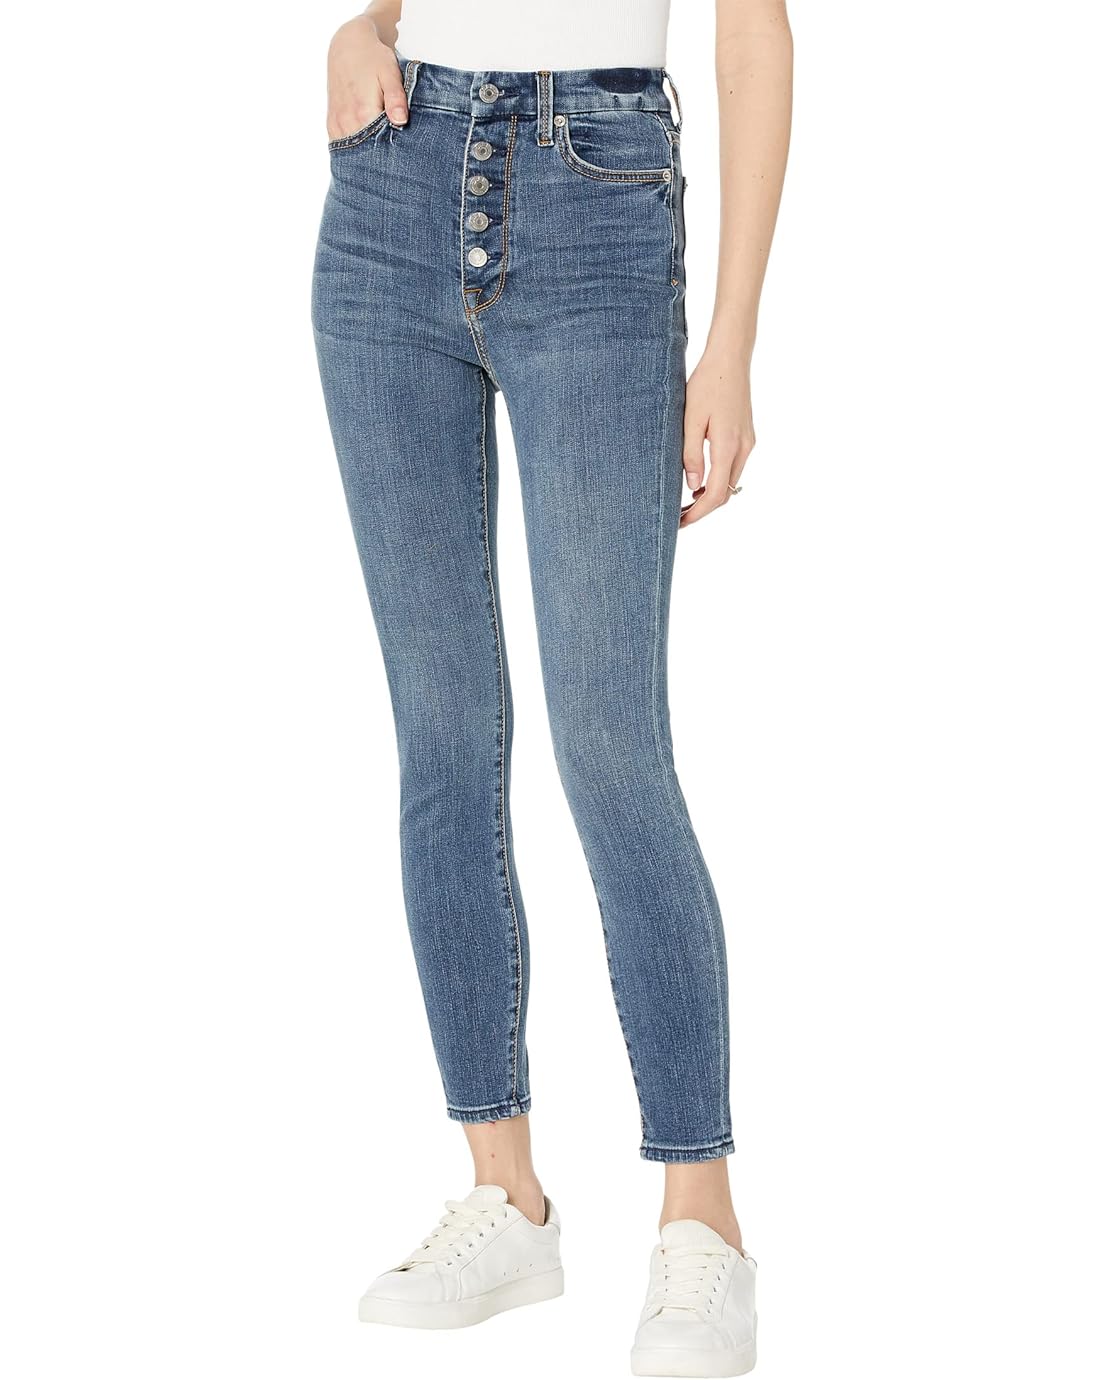 7 For All Mankind Aubrey Exposed Button Fly in Troubador